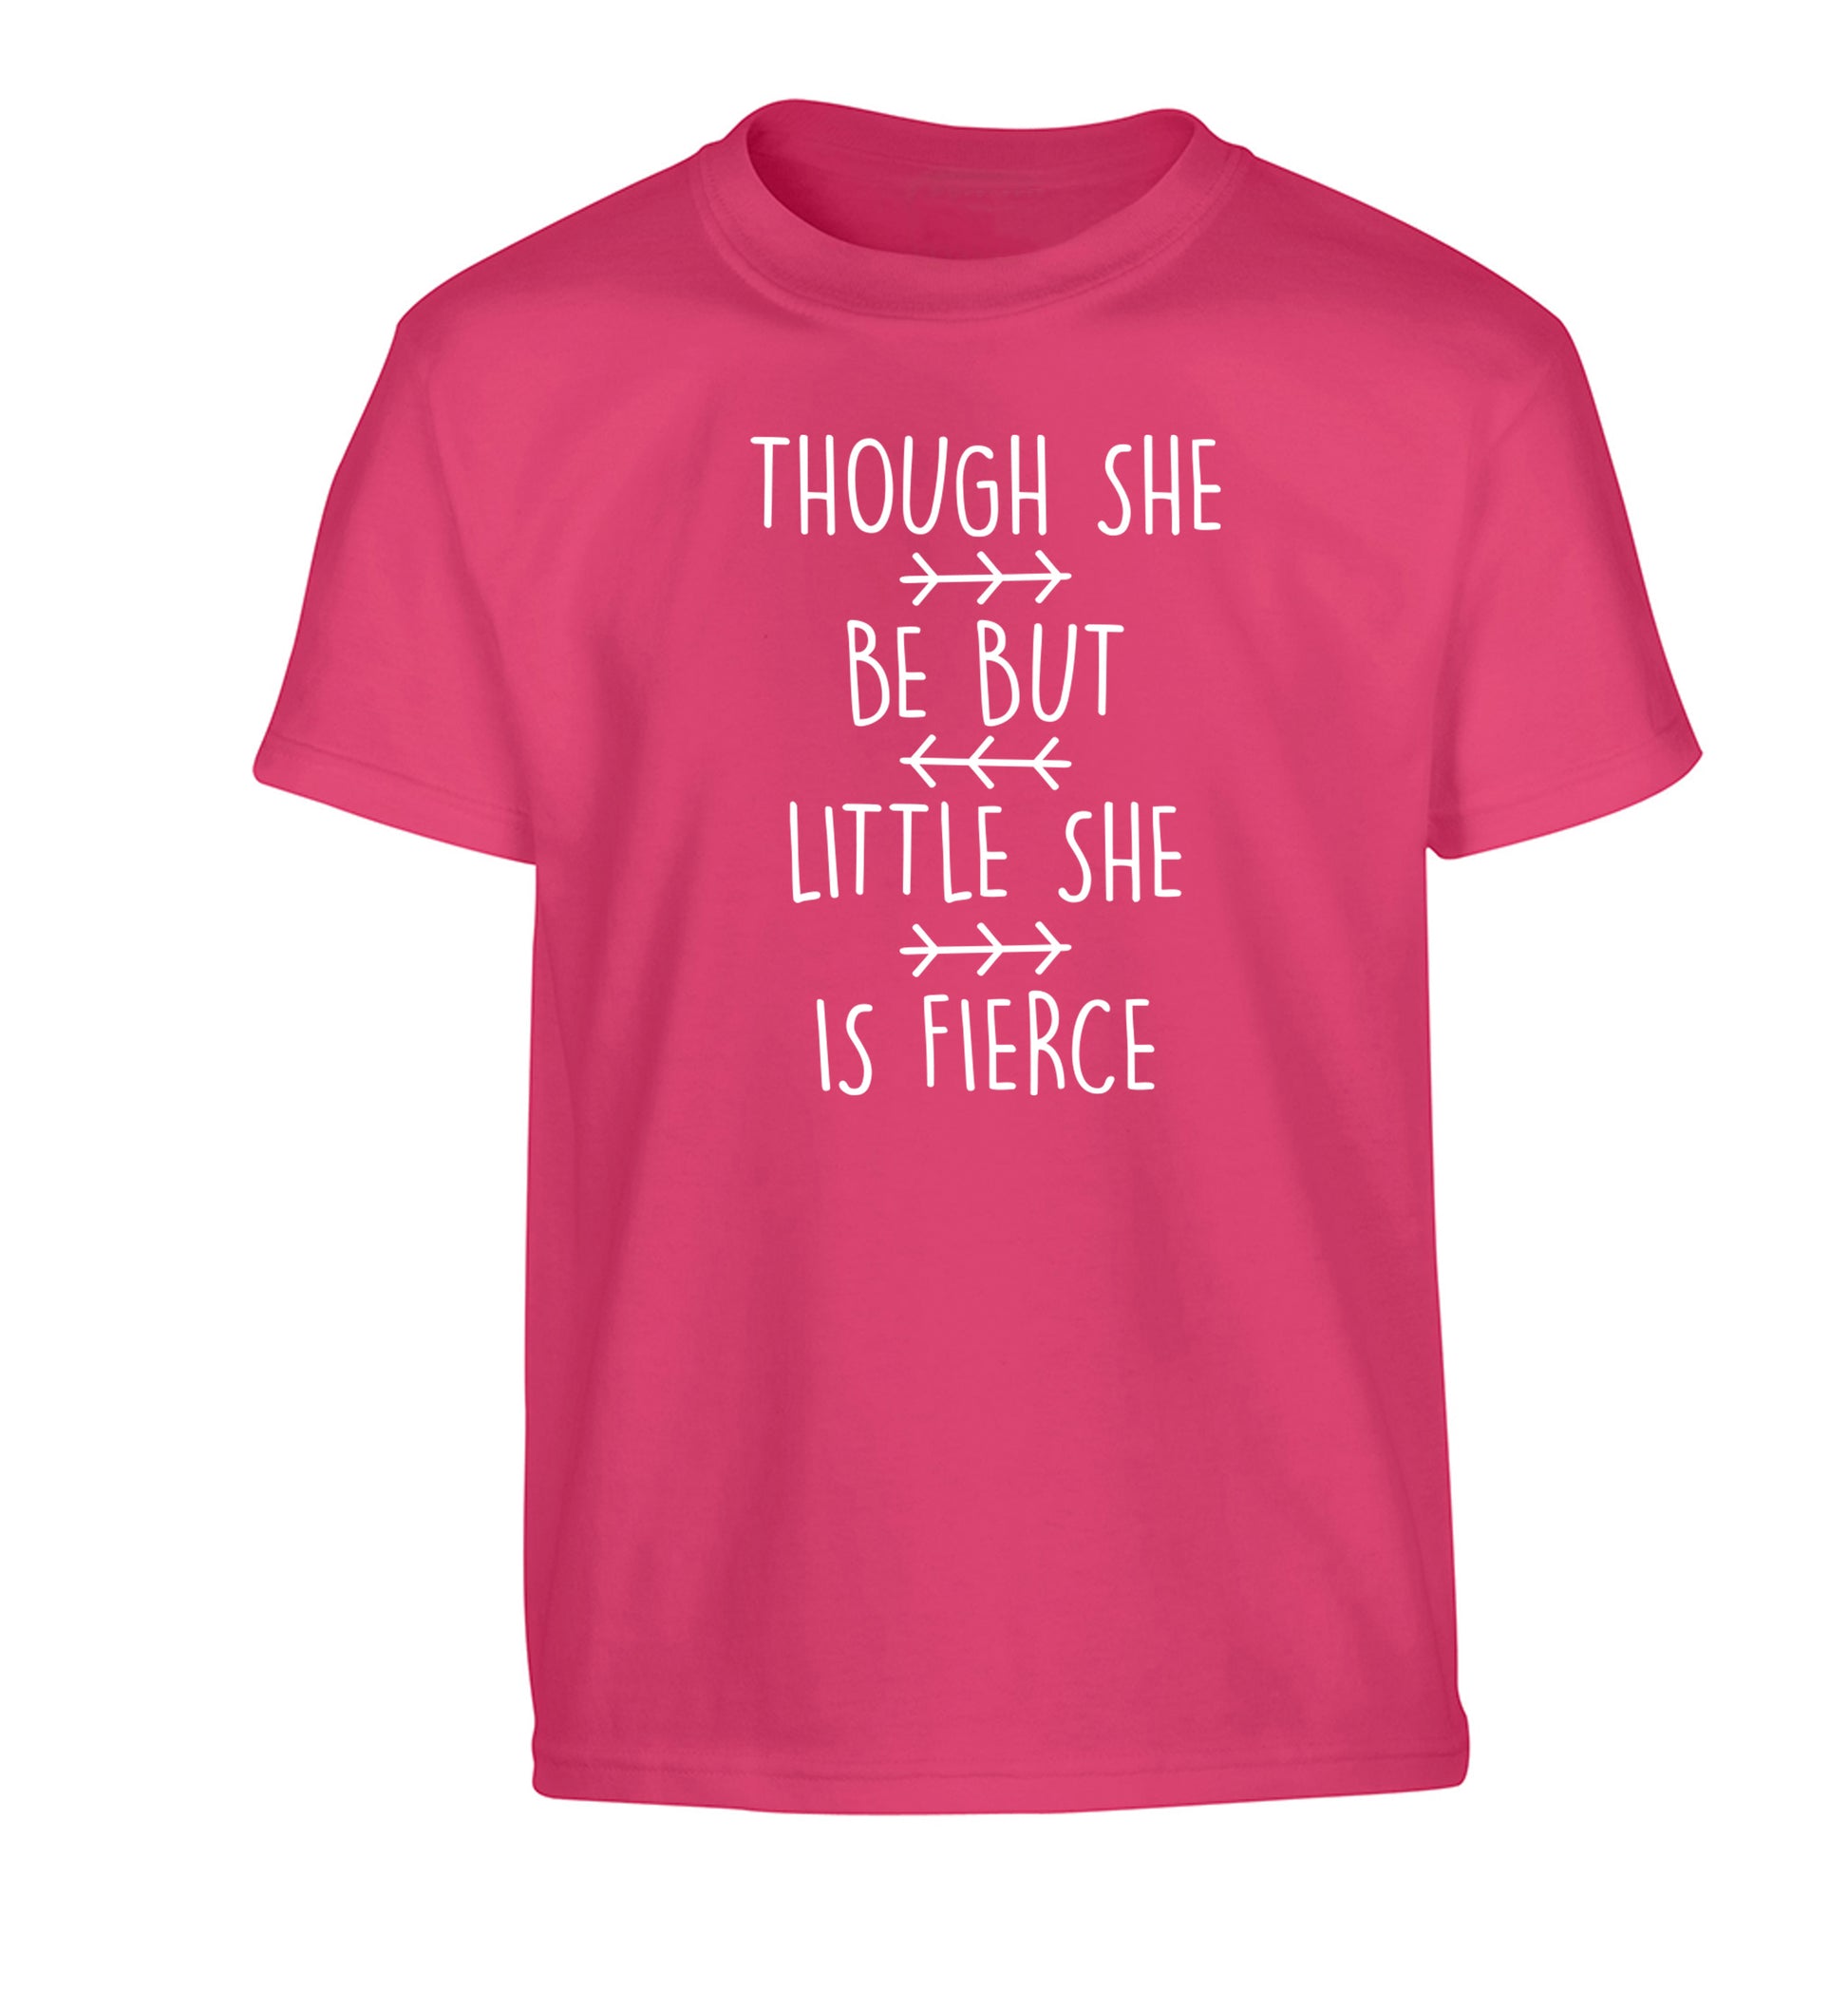 Though she be little she be fierce Children's pink Tshirt 12-14 Years